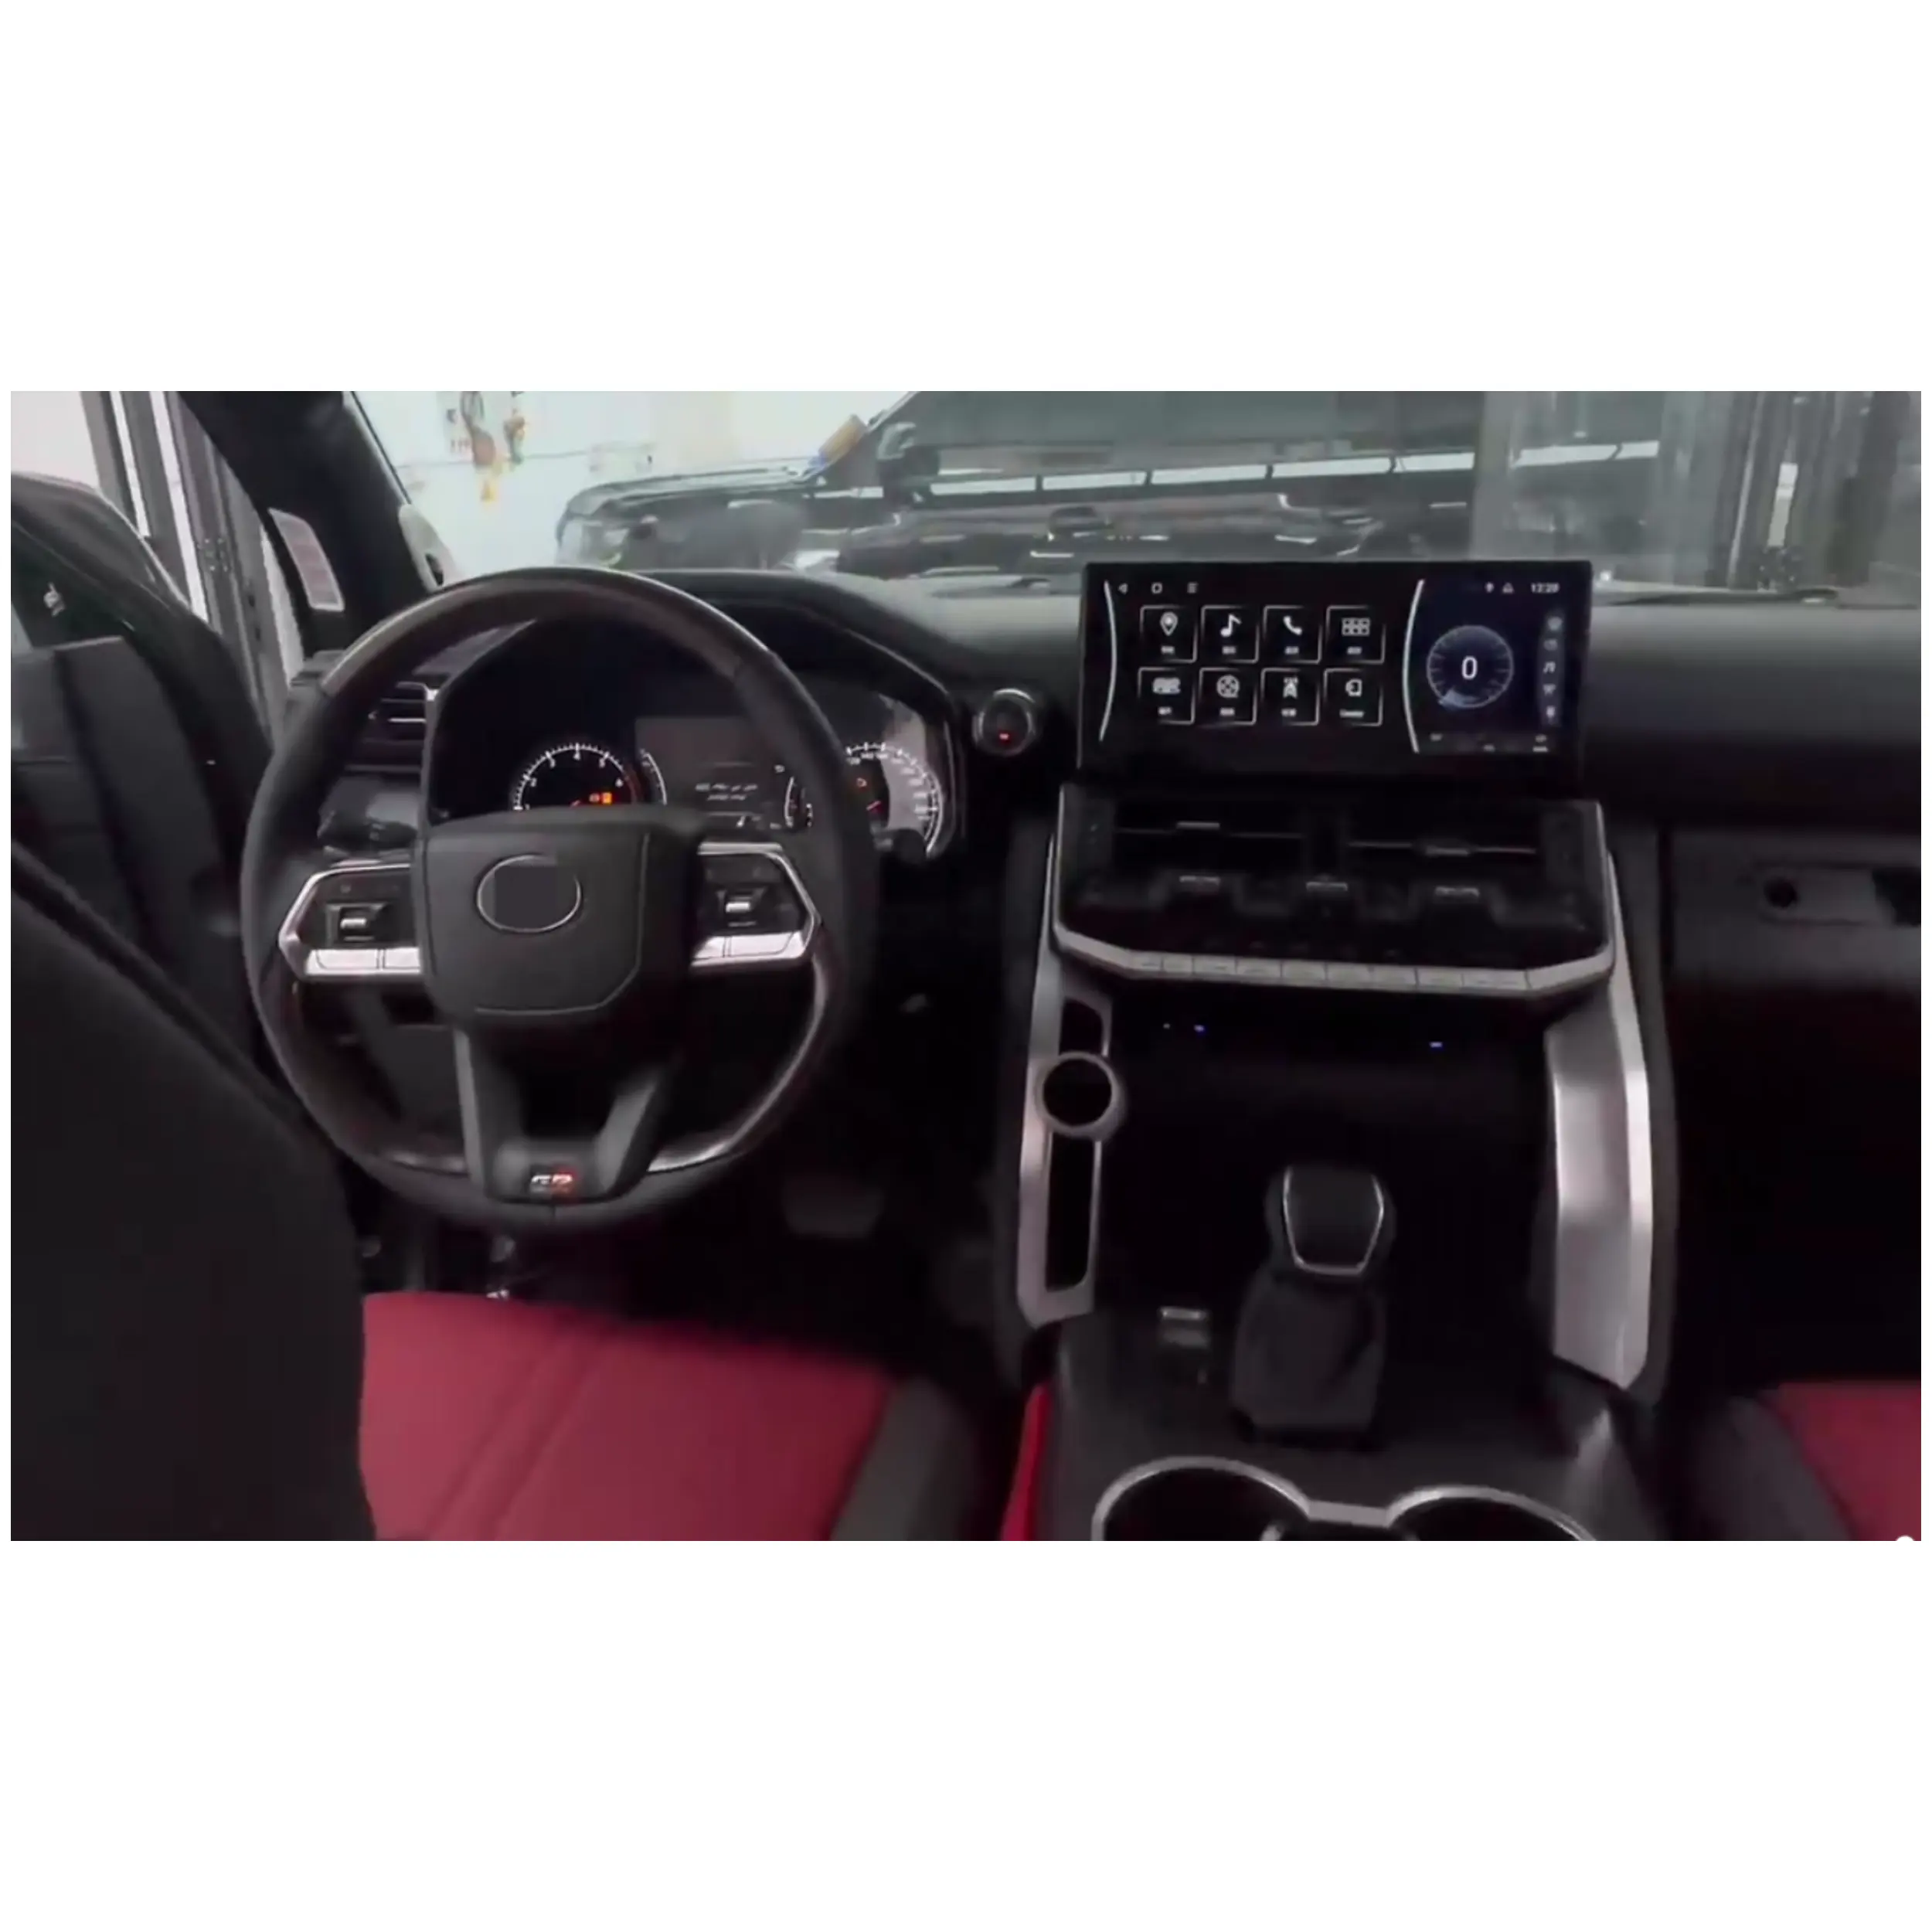 Relyauto new mold complete interior modify with display for Toyota LC200 upgrade to LC300